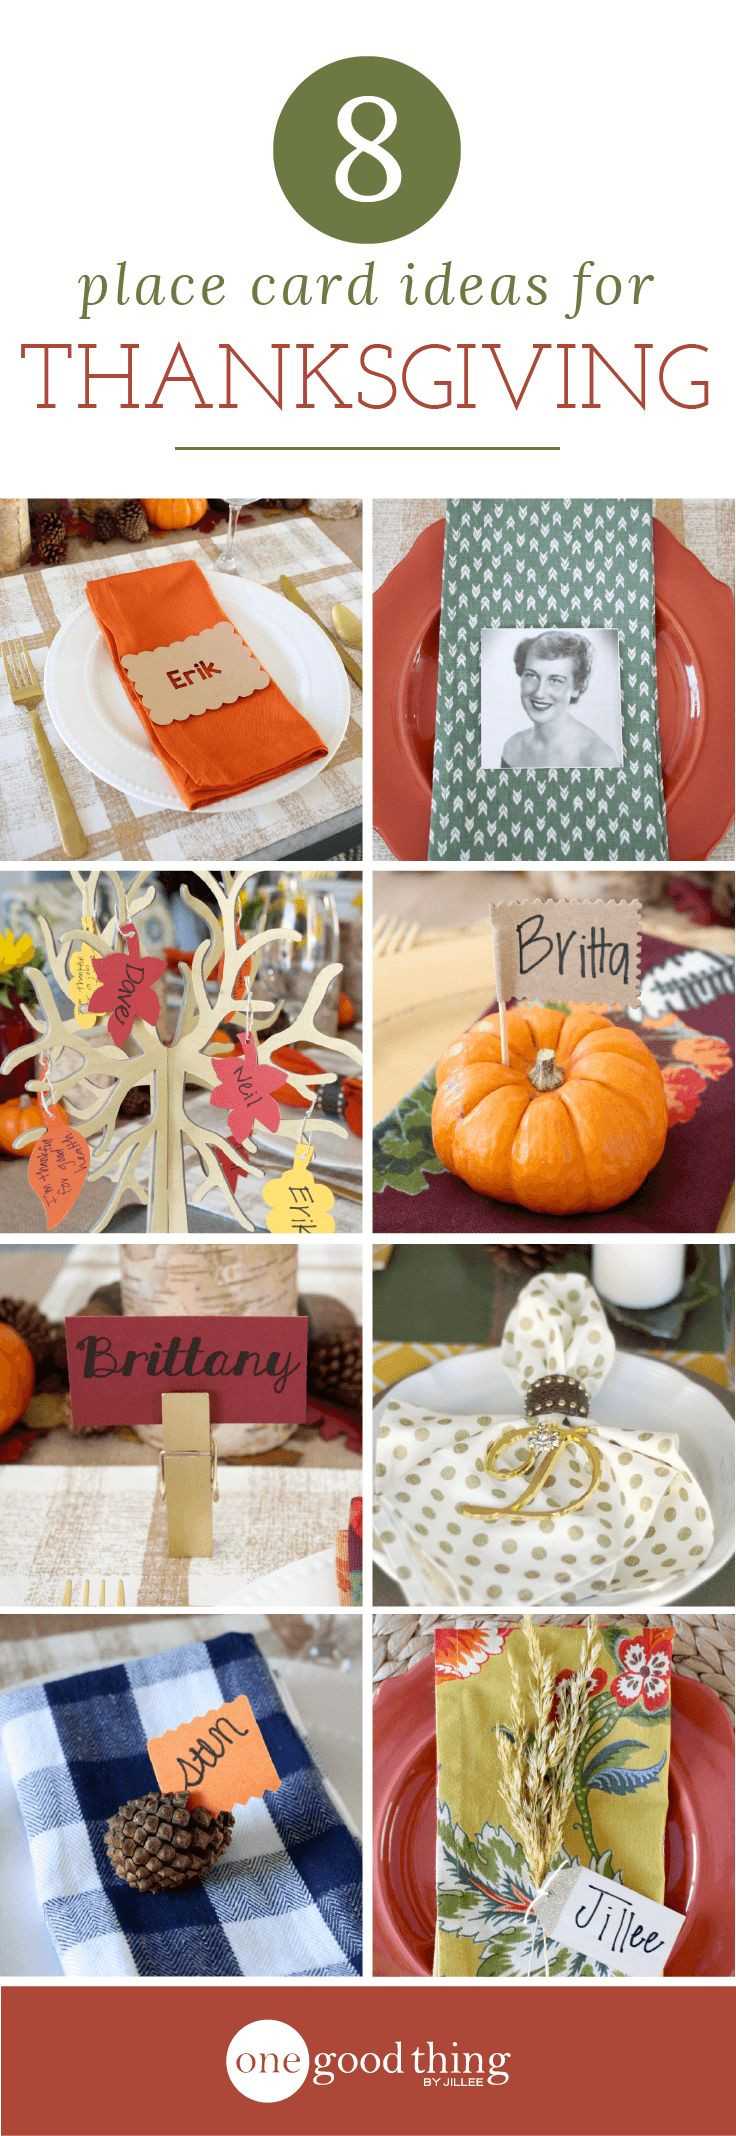 Gift Ideas For Thanksgiving Guests
 1000 images about e Good Thing on Pinterest